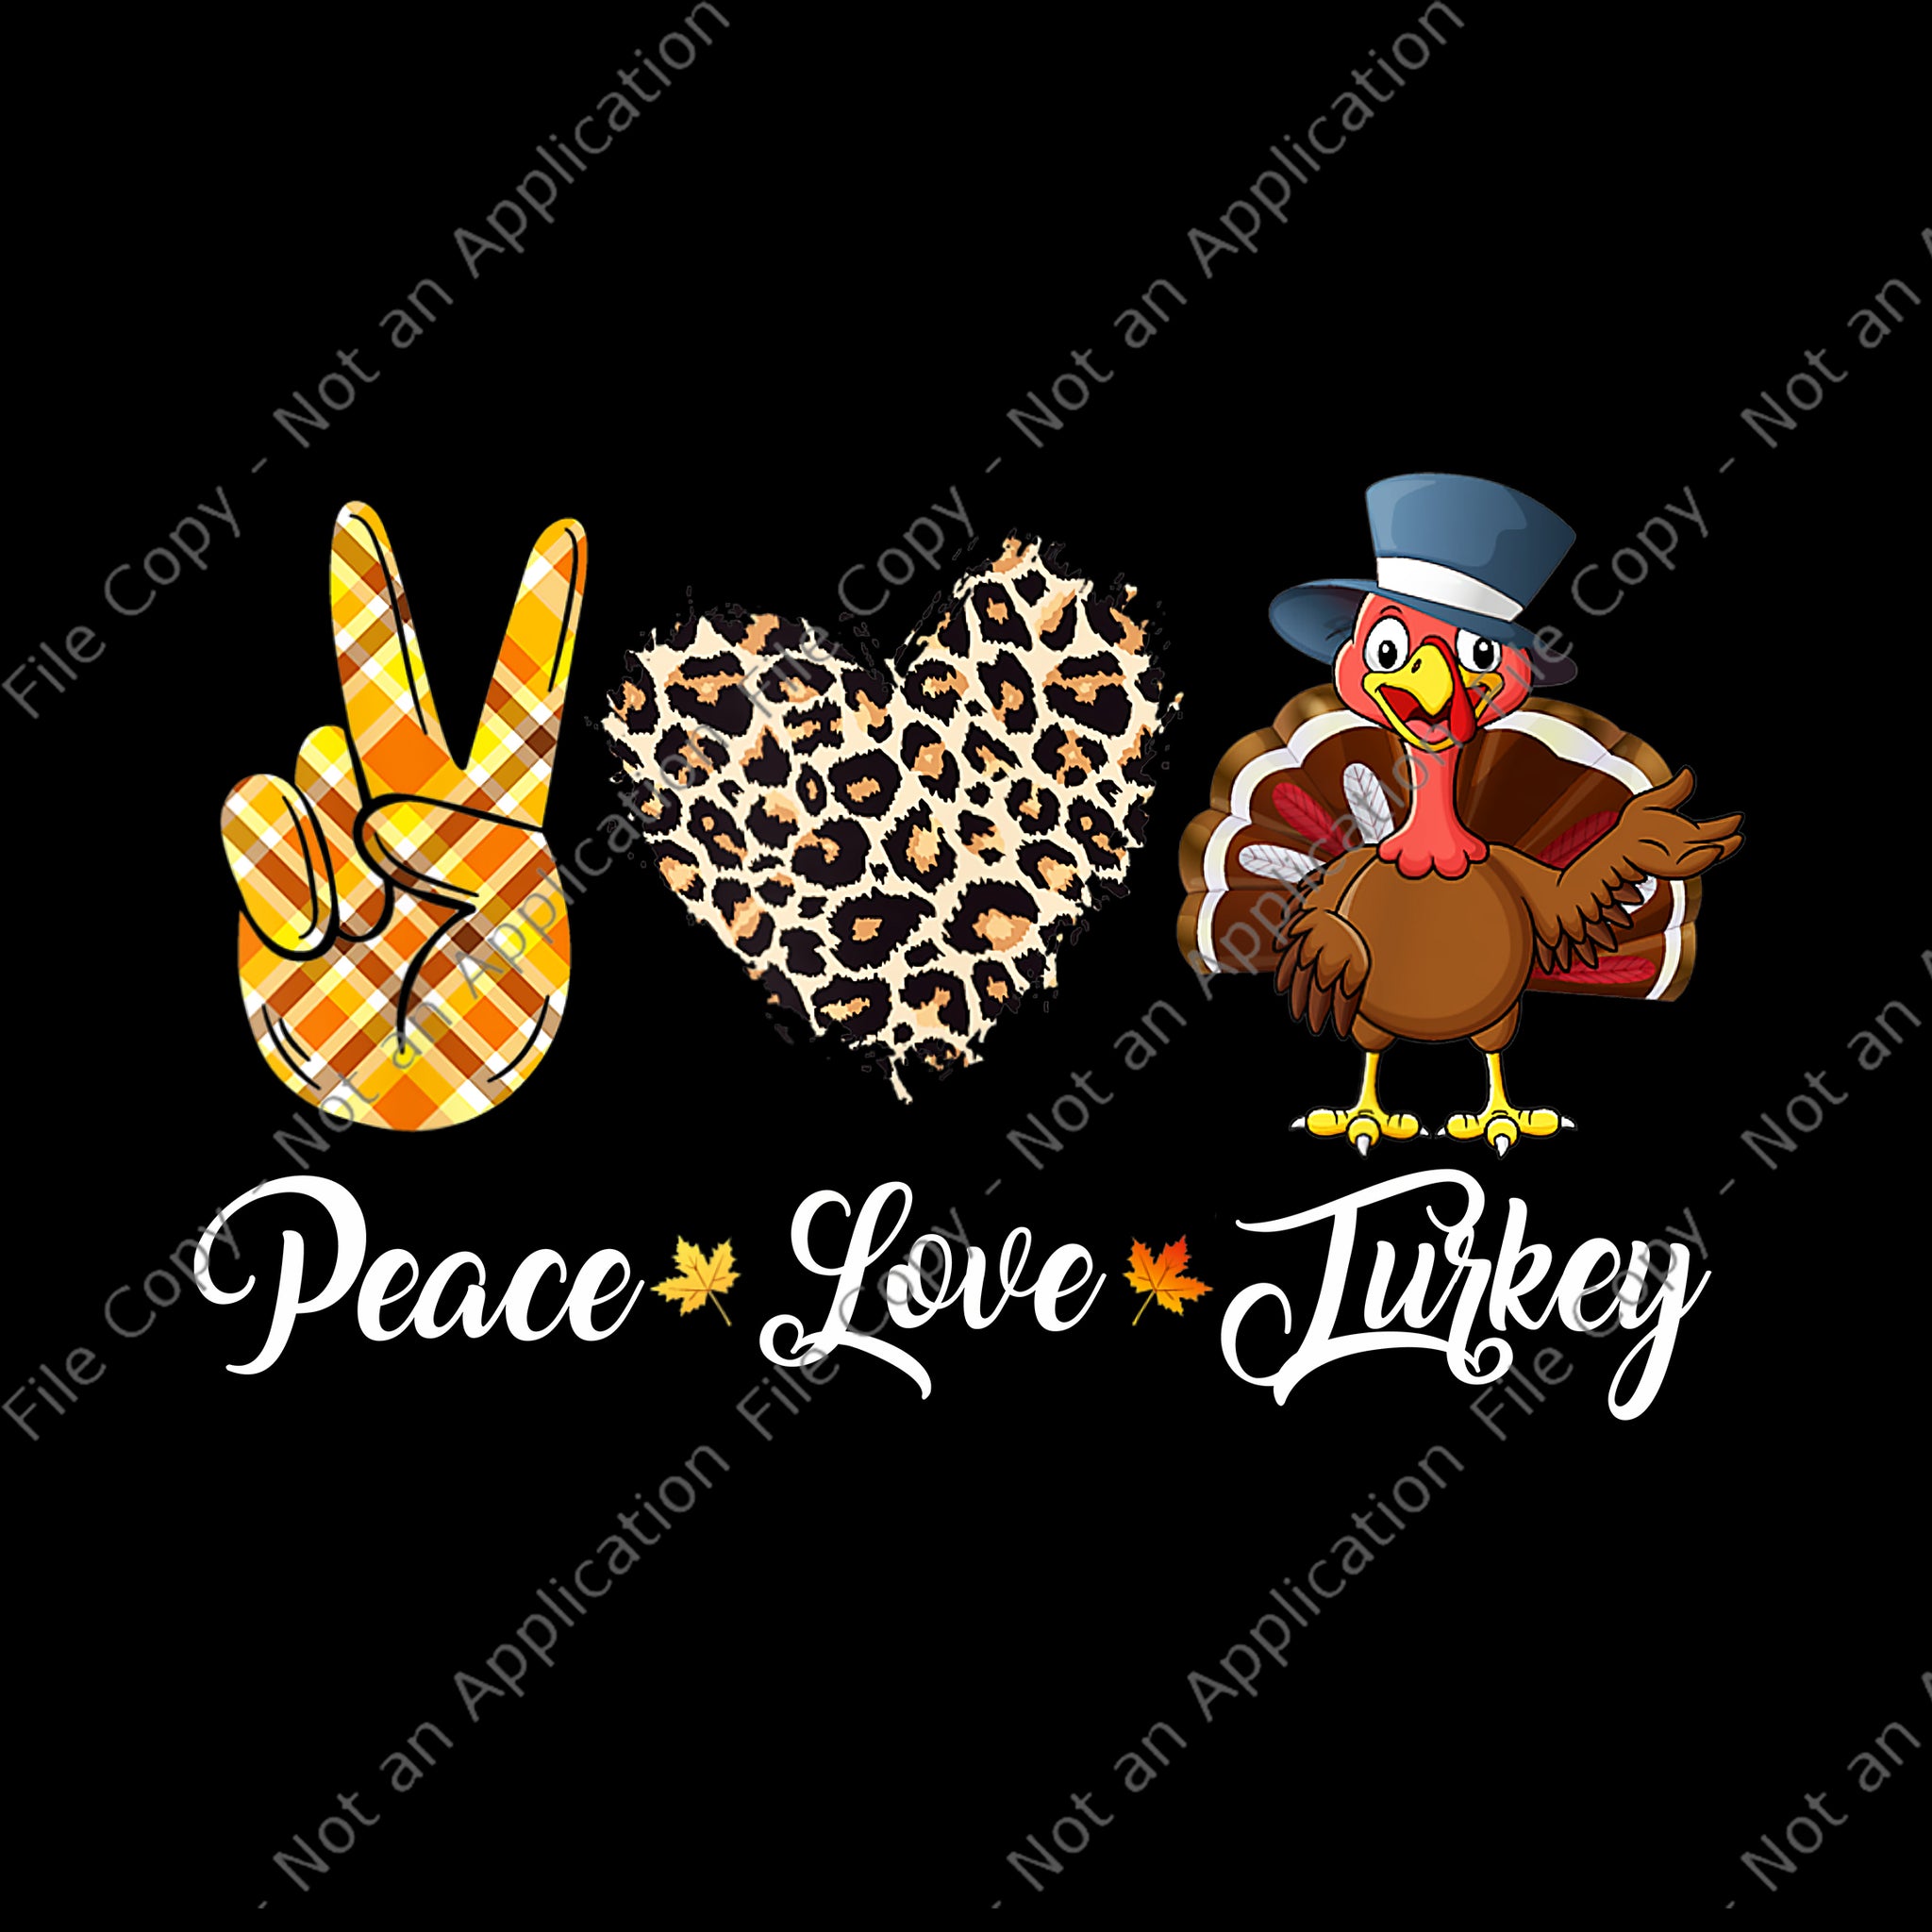 Peace Love Turkey Png, Thanksgiving Png, Turkey Png, Thanksgiving Day 2021 Png, Turkey Day Png